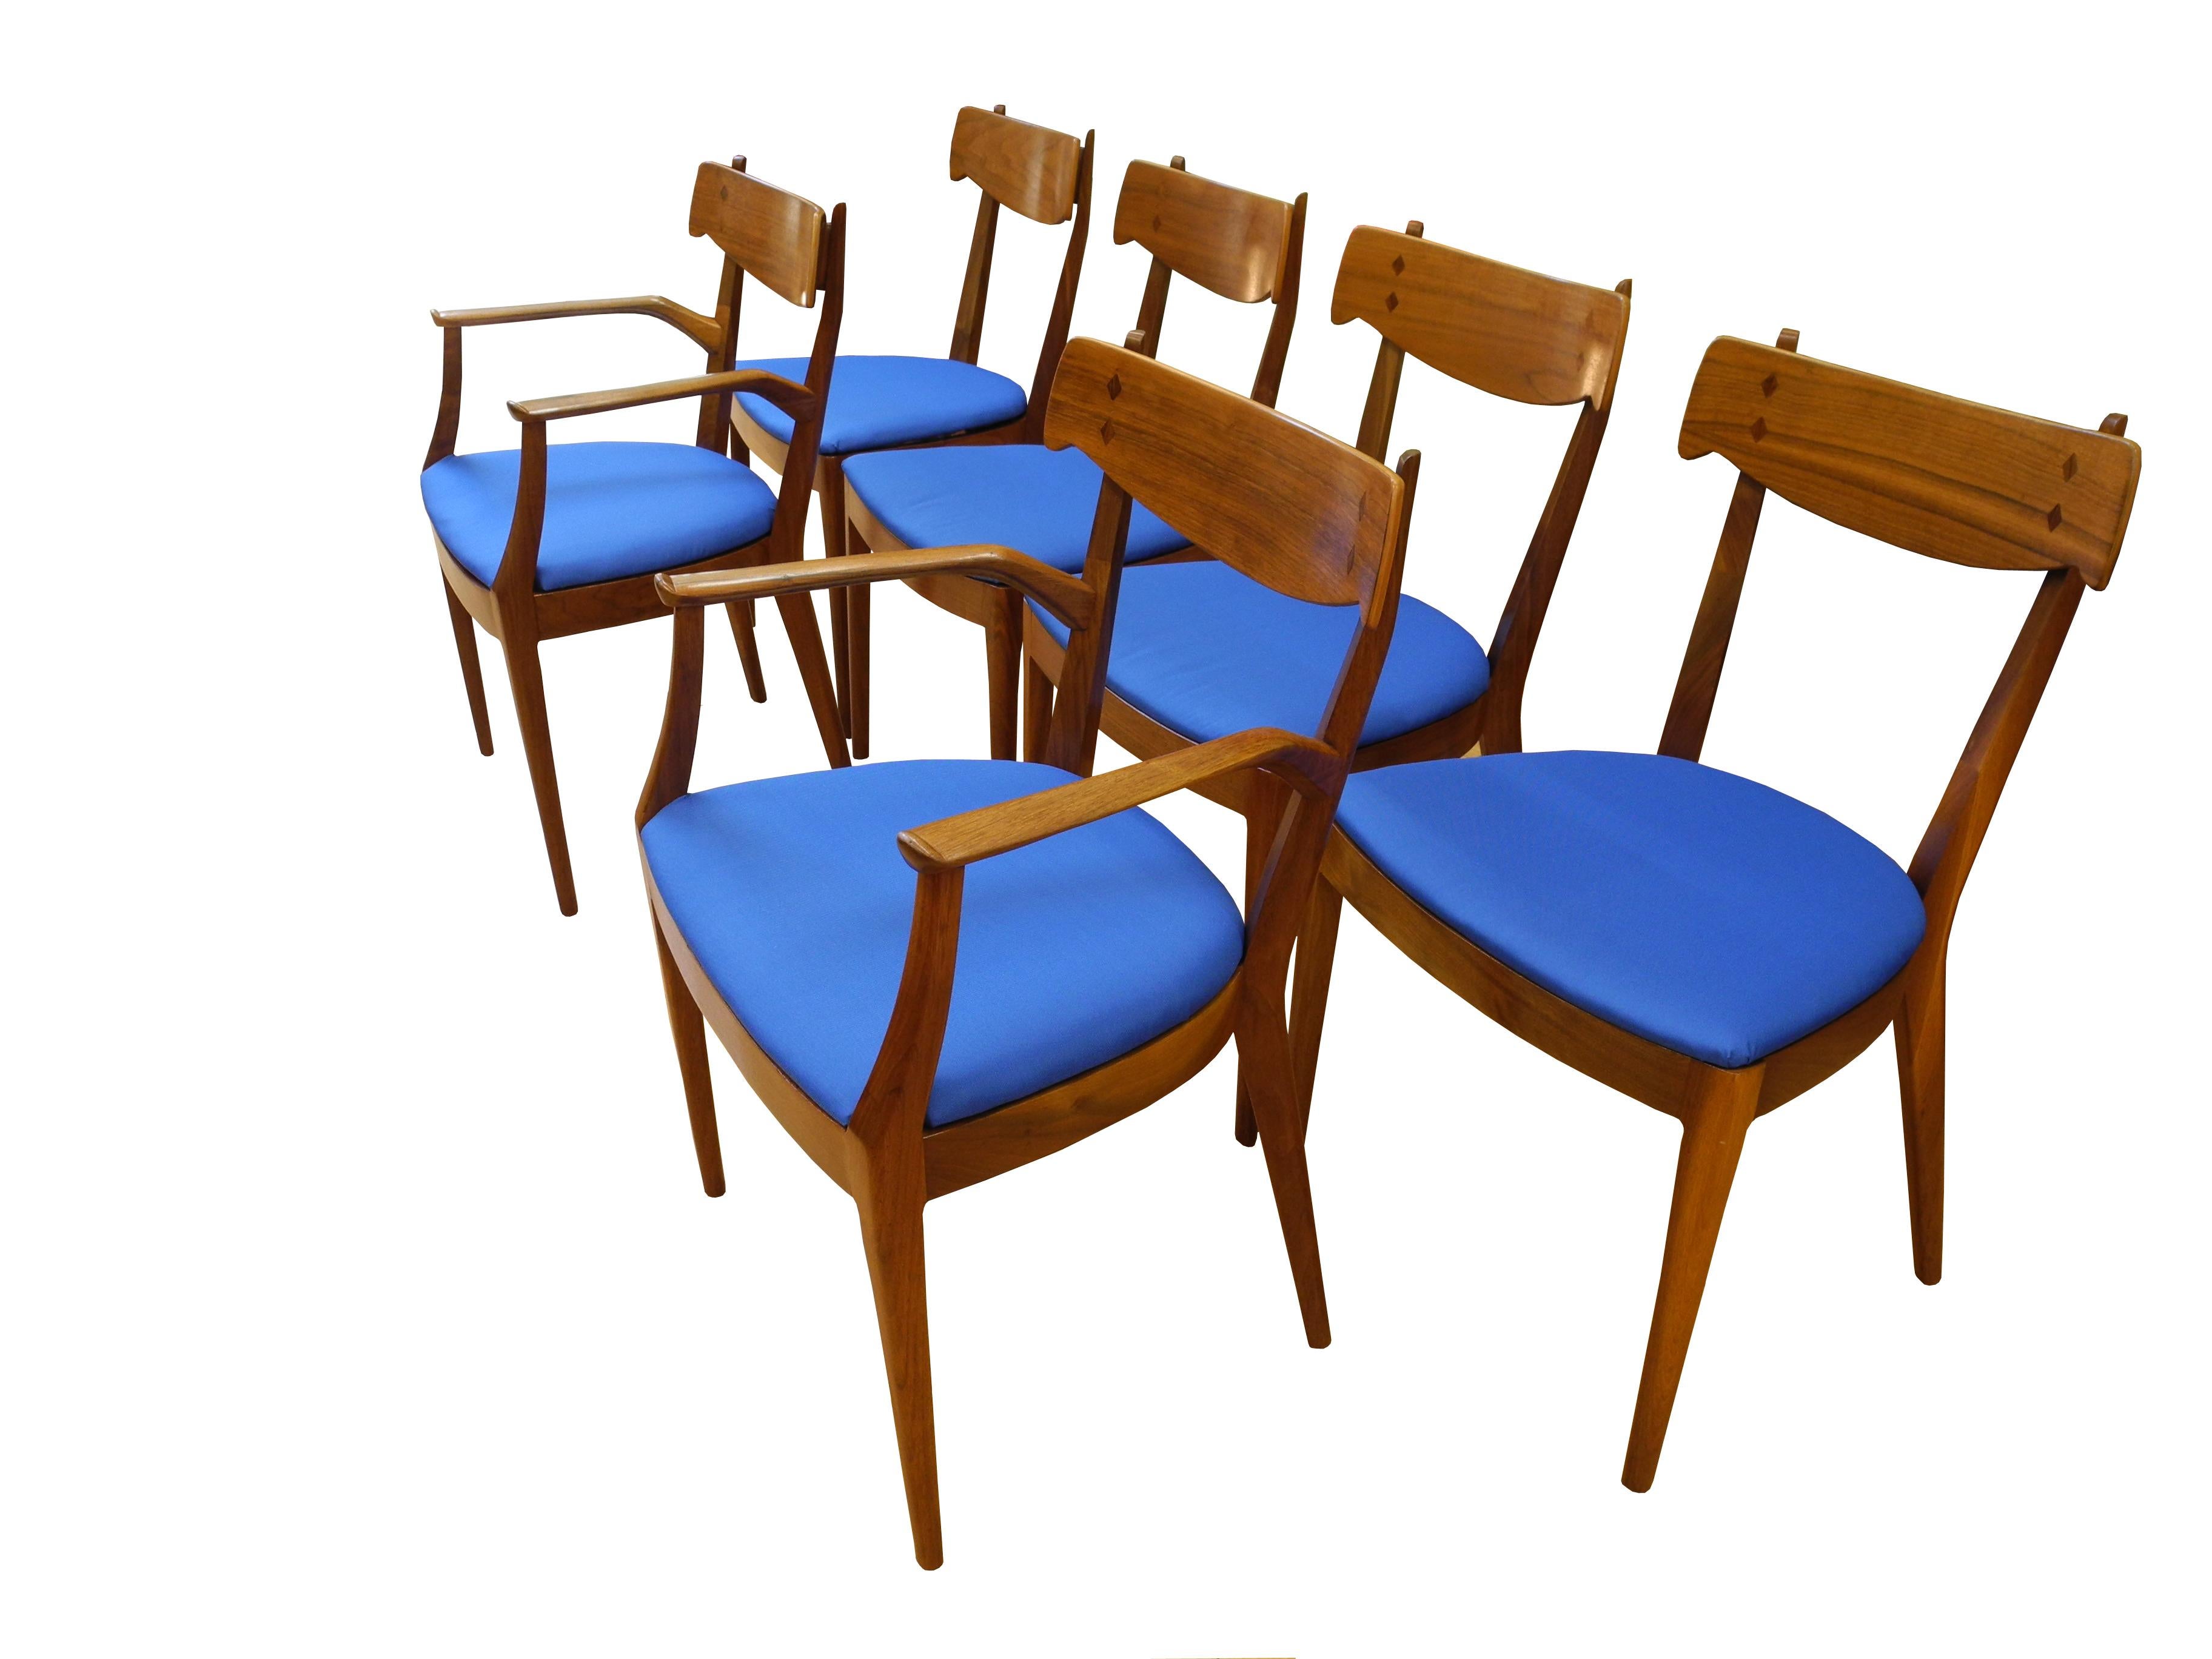 This set of six dining room chairs were designed by Kipp Stewart in the 1950s. The walnut frames have subtle curves and details. There are two armchairs and four side chairs. Sold as a set of six.